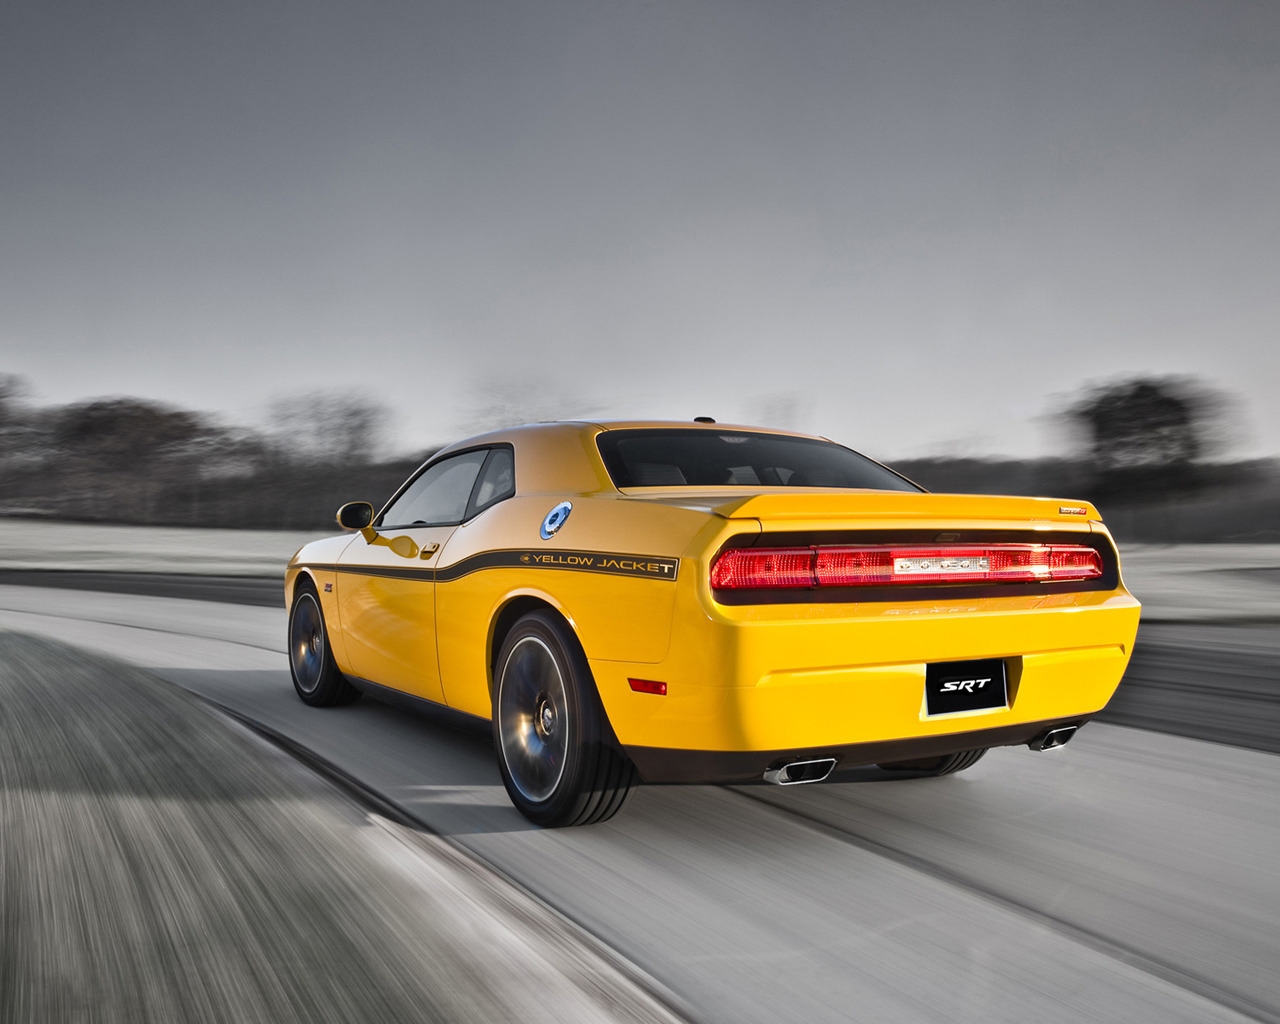 Dodge Challenger Yellow Jacket for 1280 x 1024 resolution